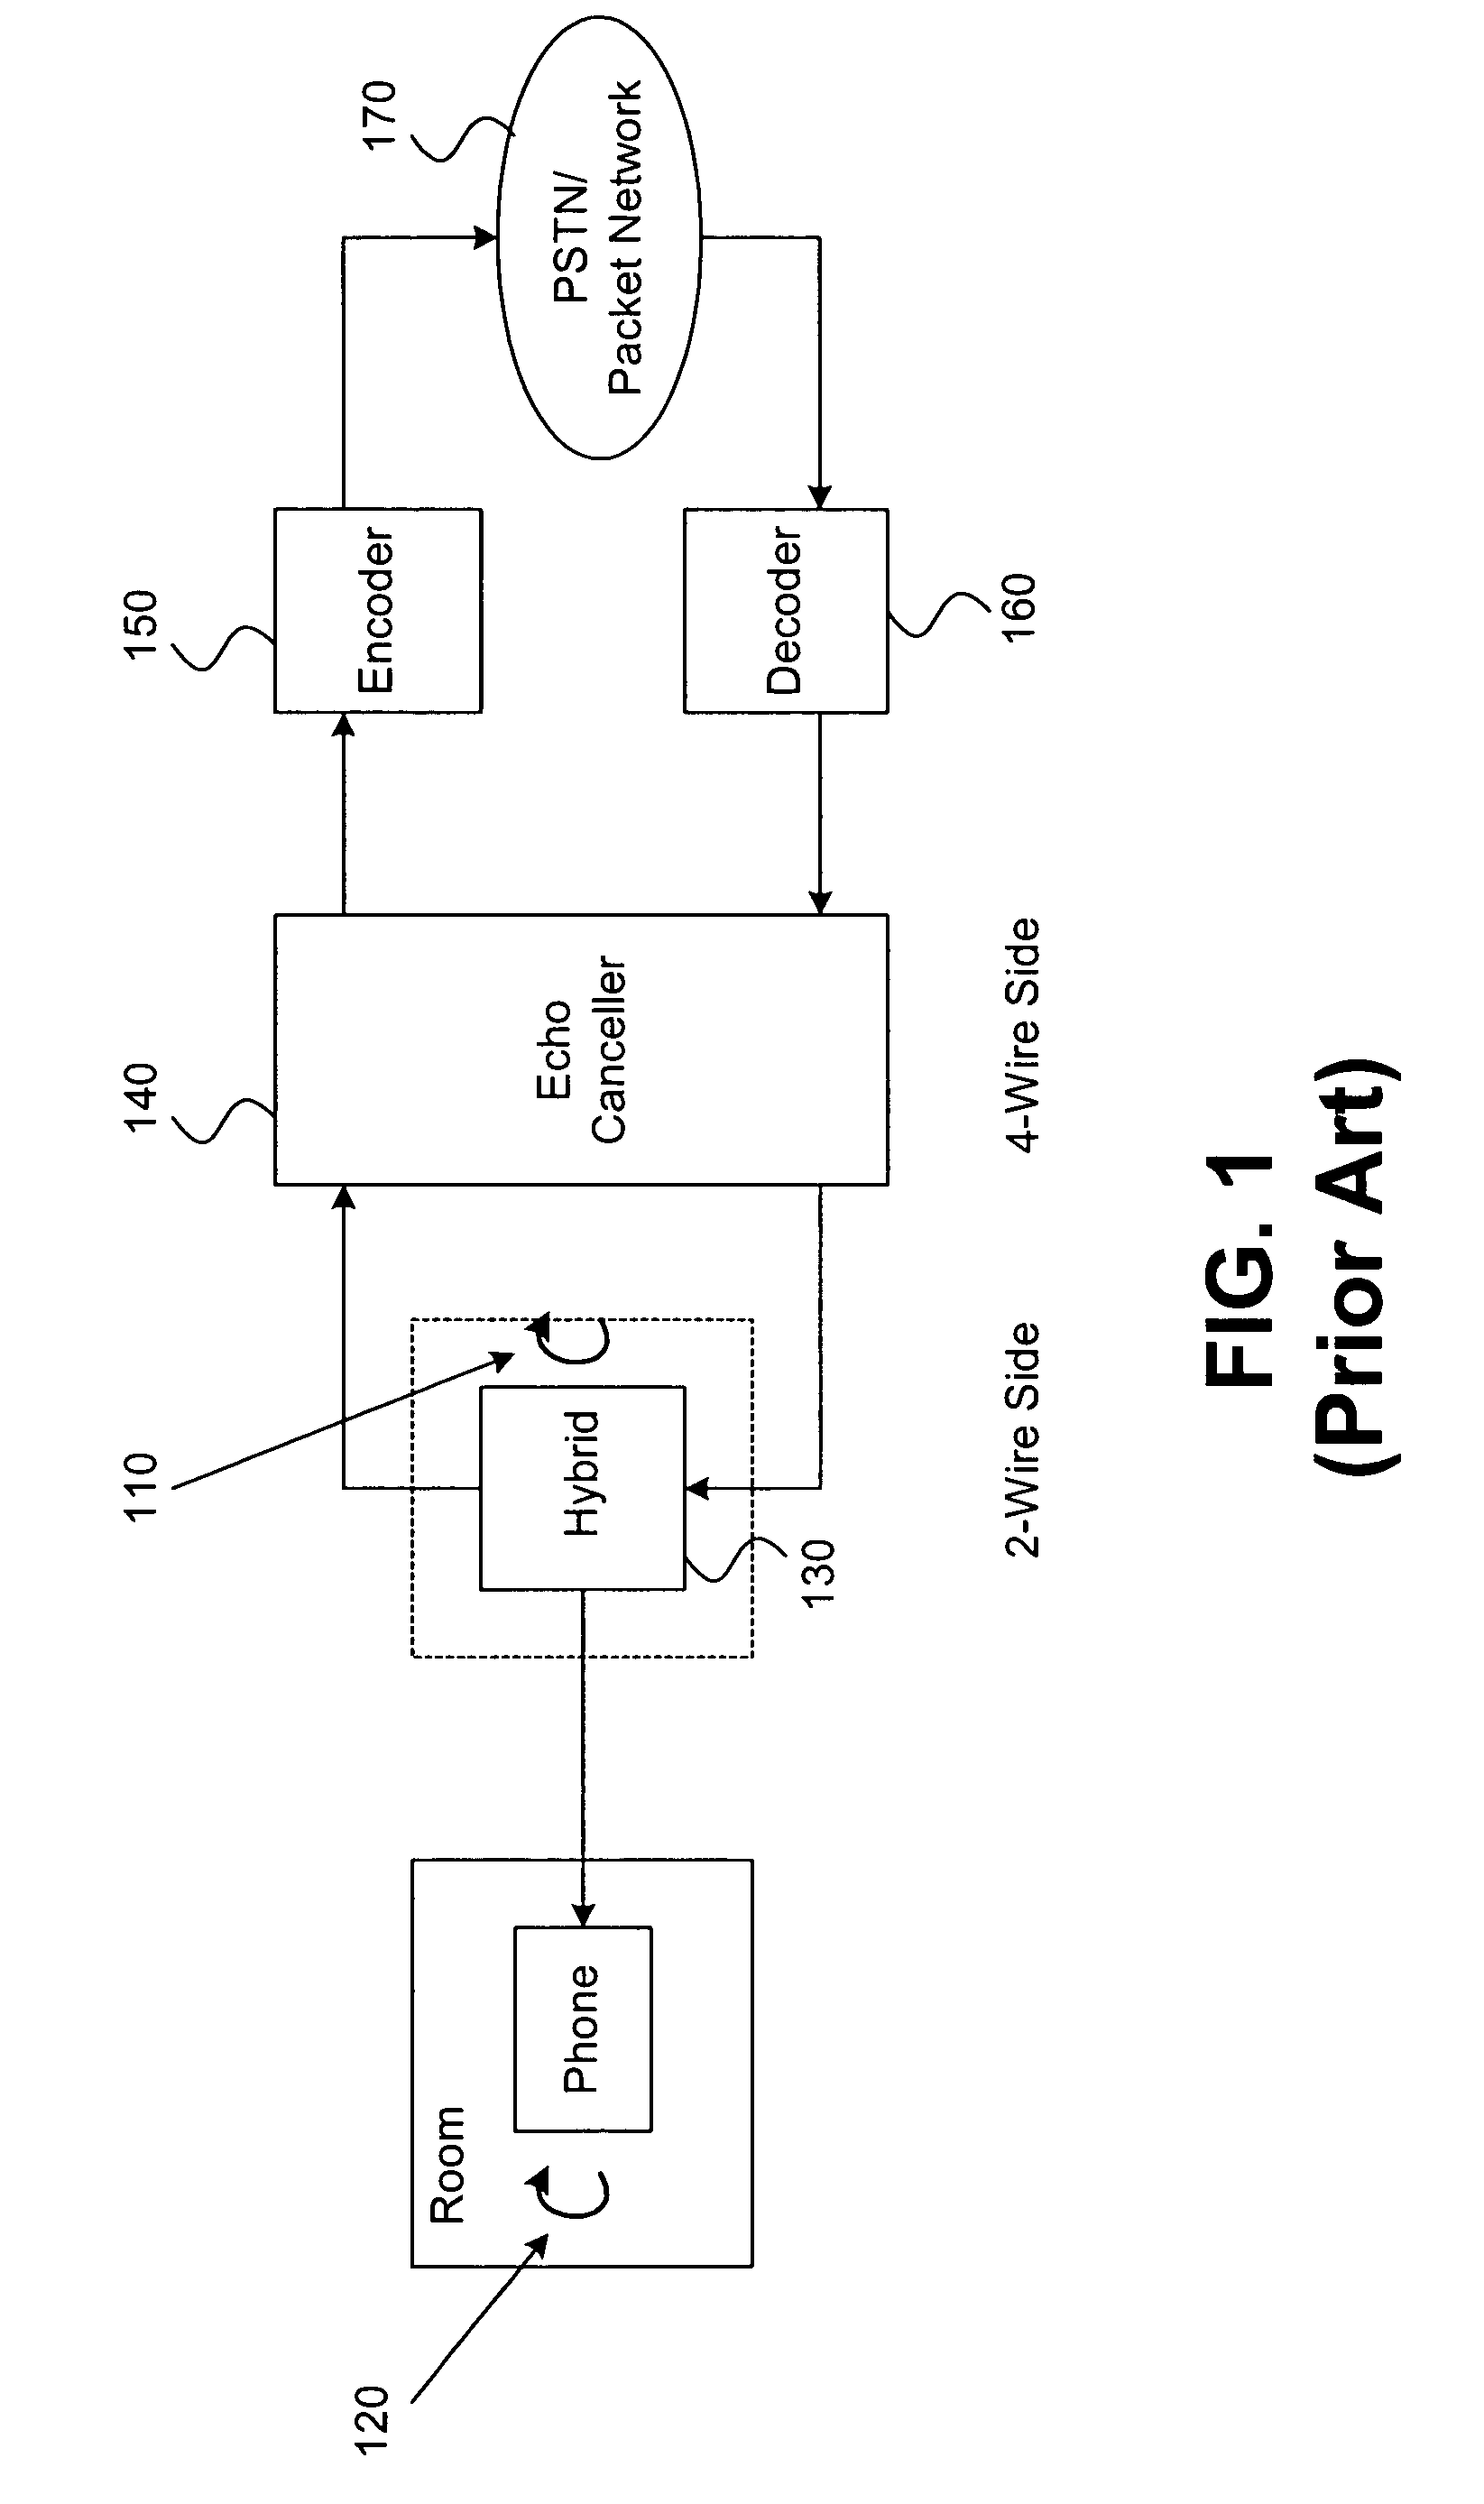 Music detection for enhancing echo cancellation and speech coding